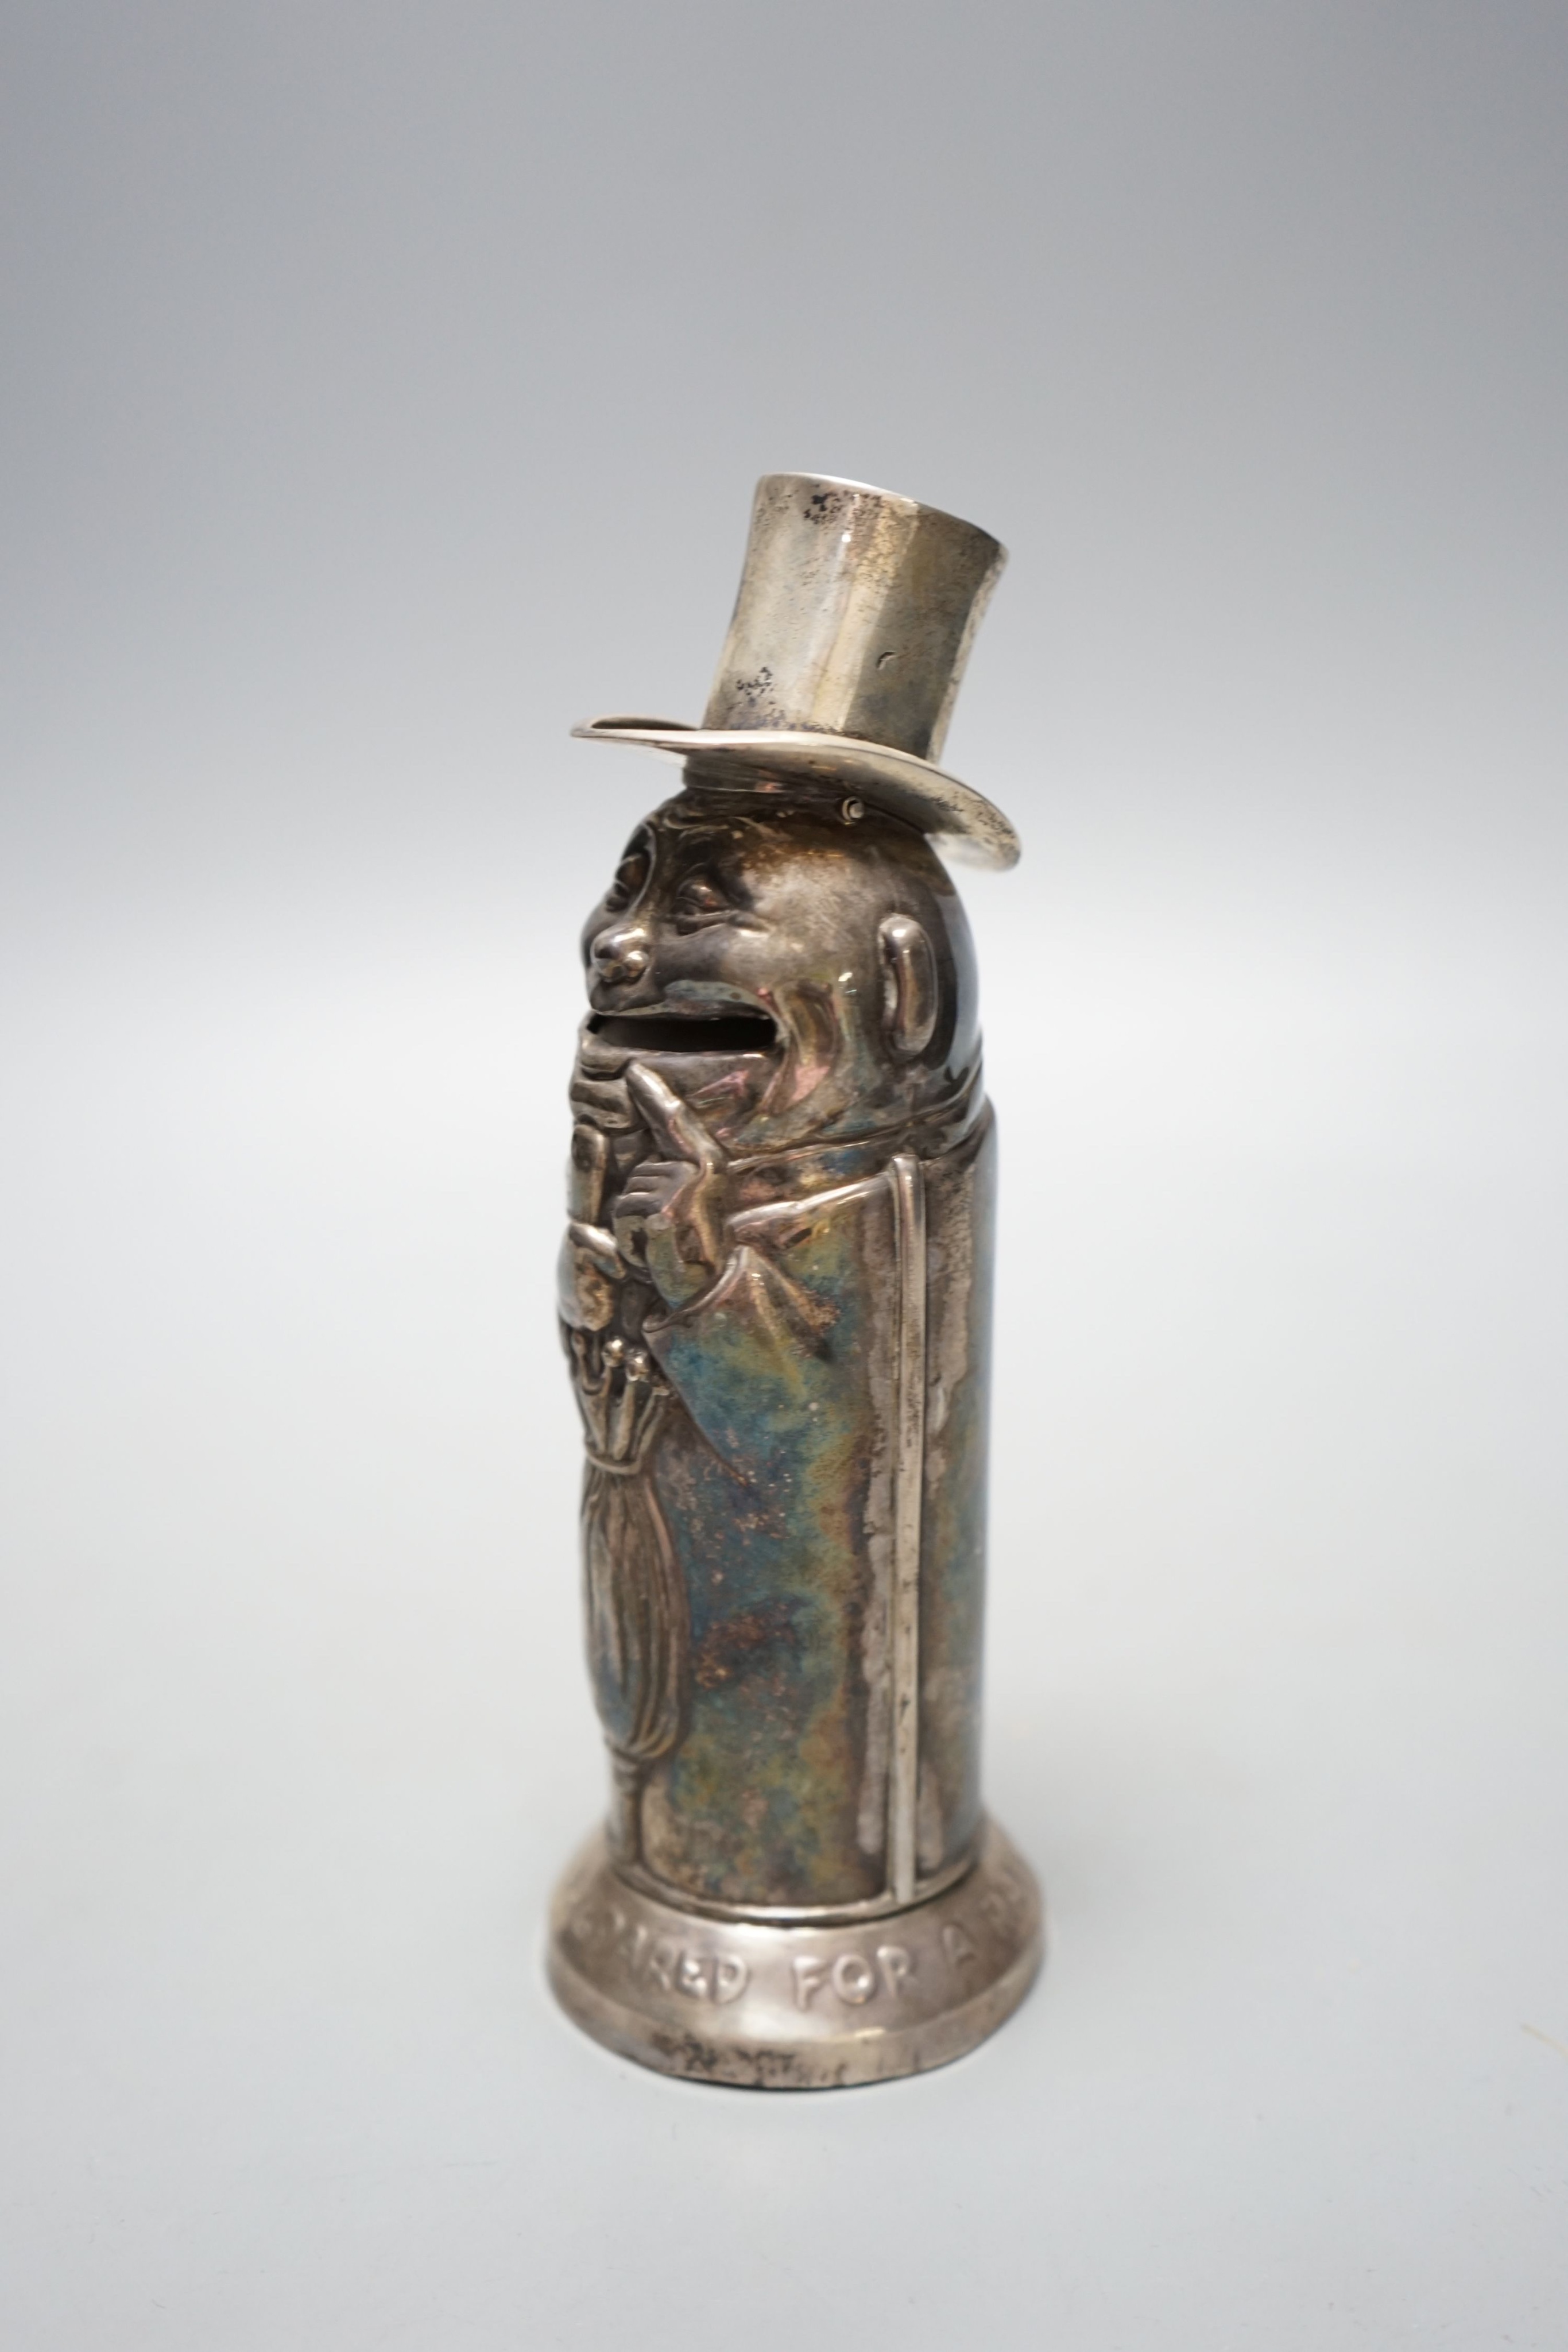 A George V silver novelty money box, embossed with a gentleman with top hat and umbrella, Birmingham, 1912, 16.9cm, inscribed 'Always be prepared for a rainy day', 107 grams.